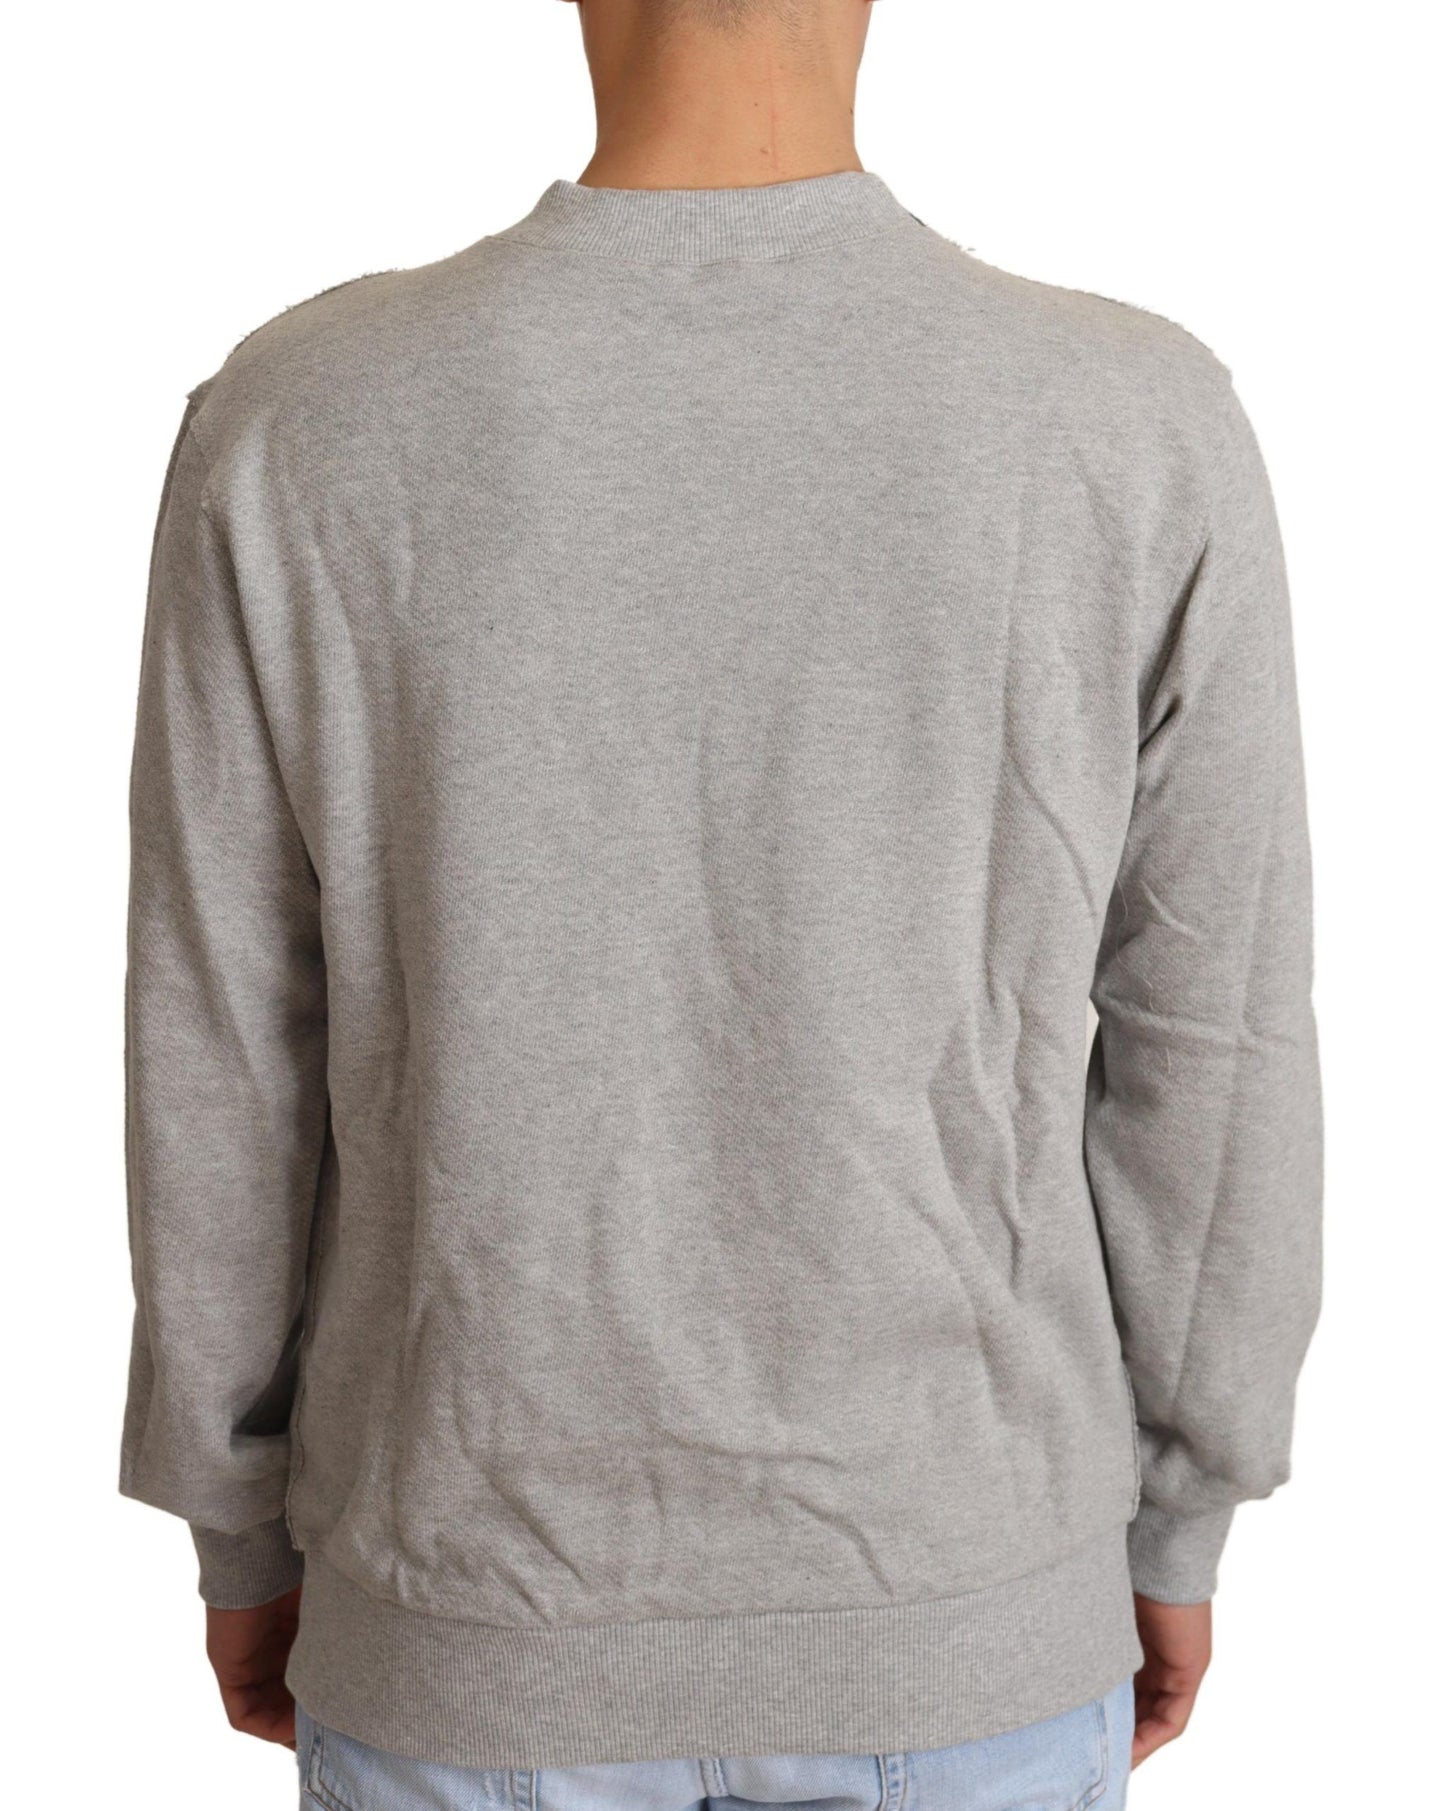 Sophisticated Gray Crewneck Sweater